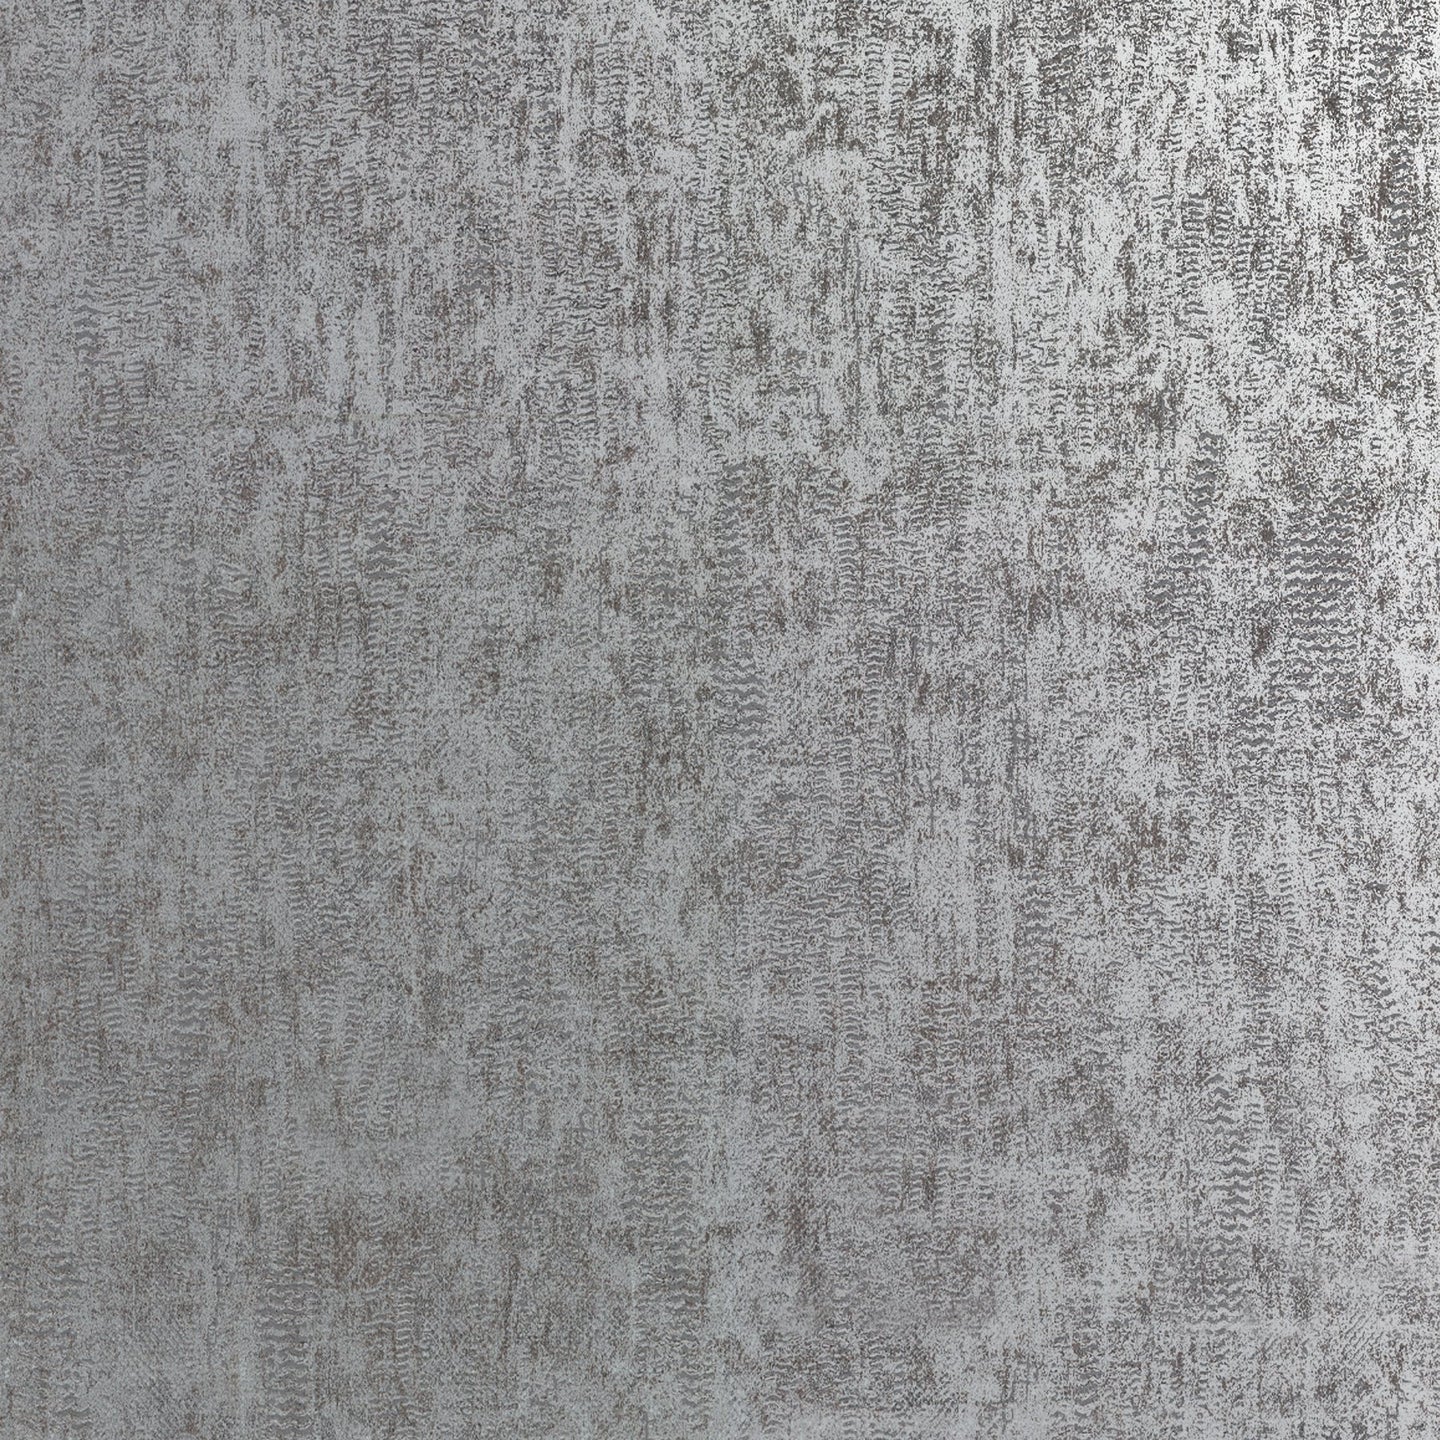 Luster Distressed Texture Wallpaper